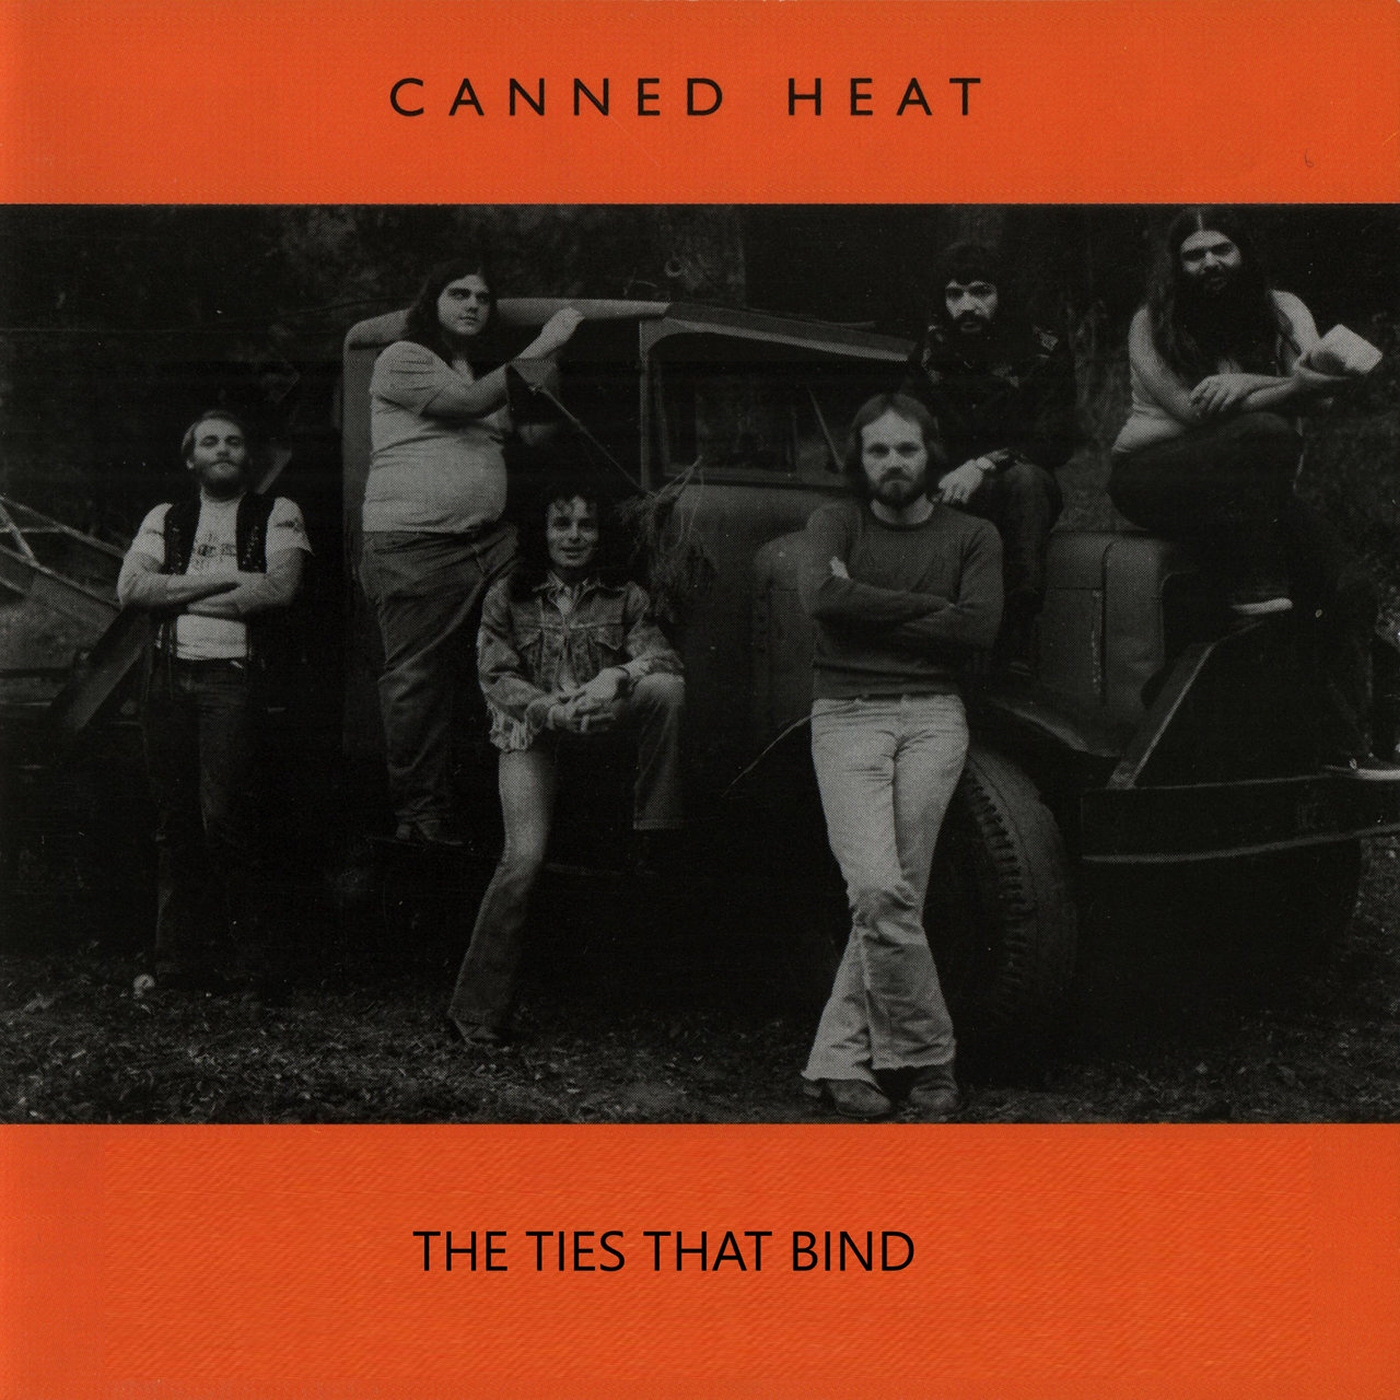 Canned heat steam фото 72